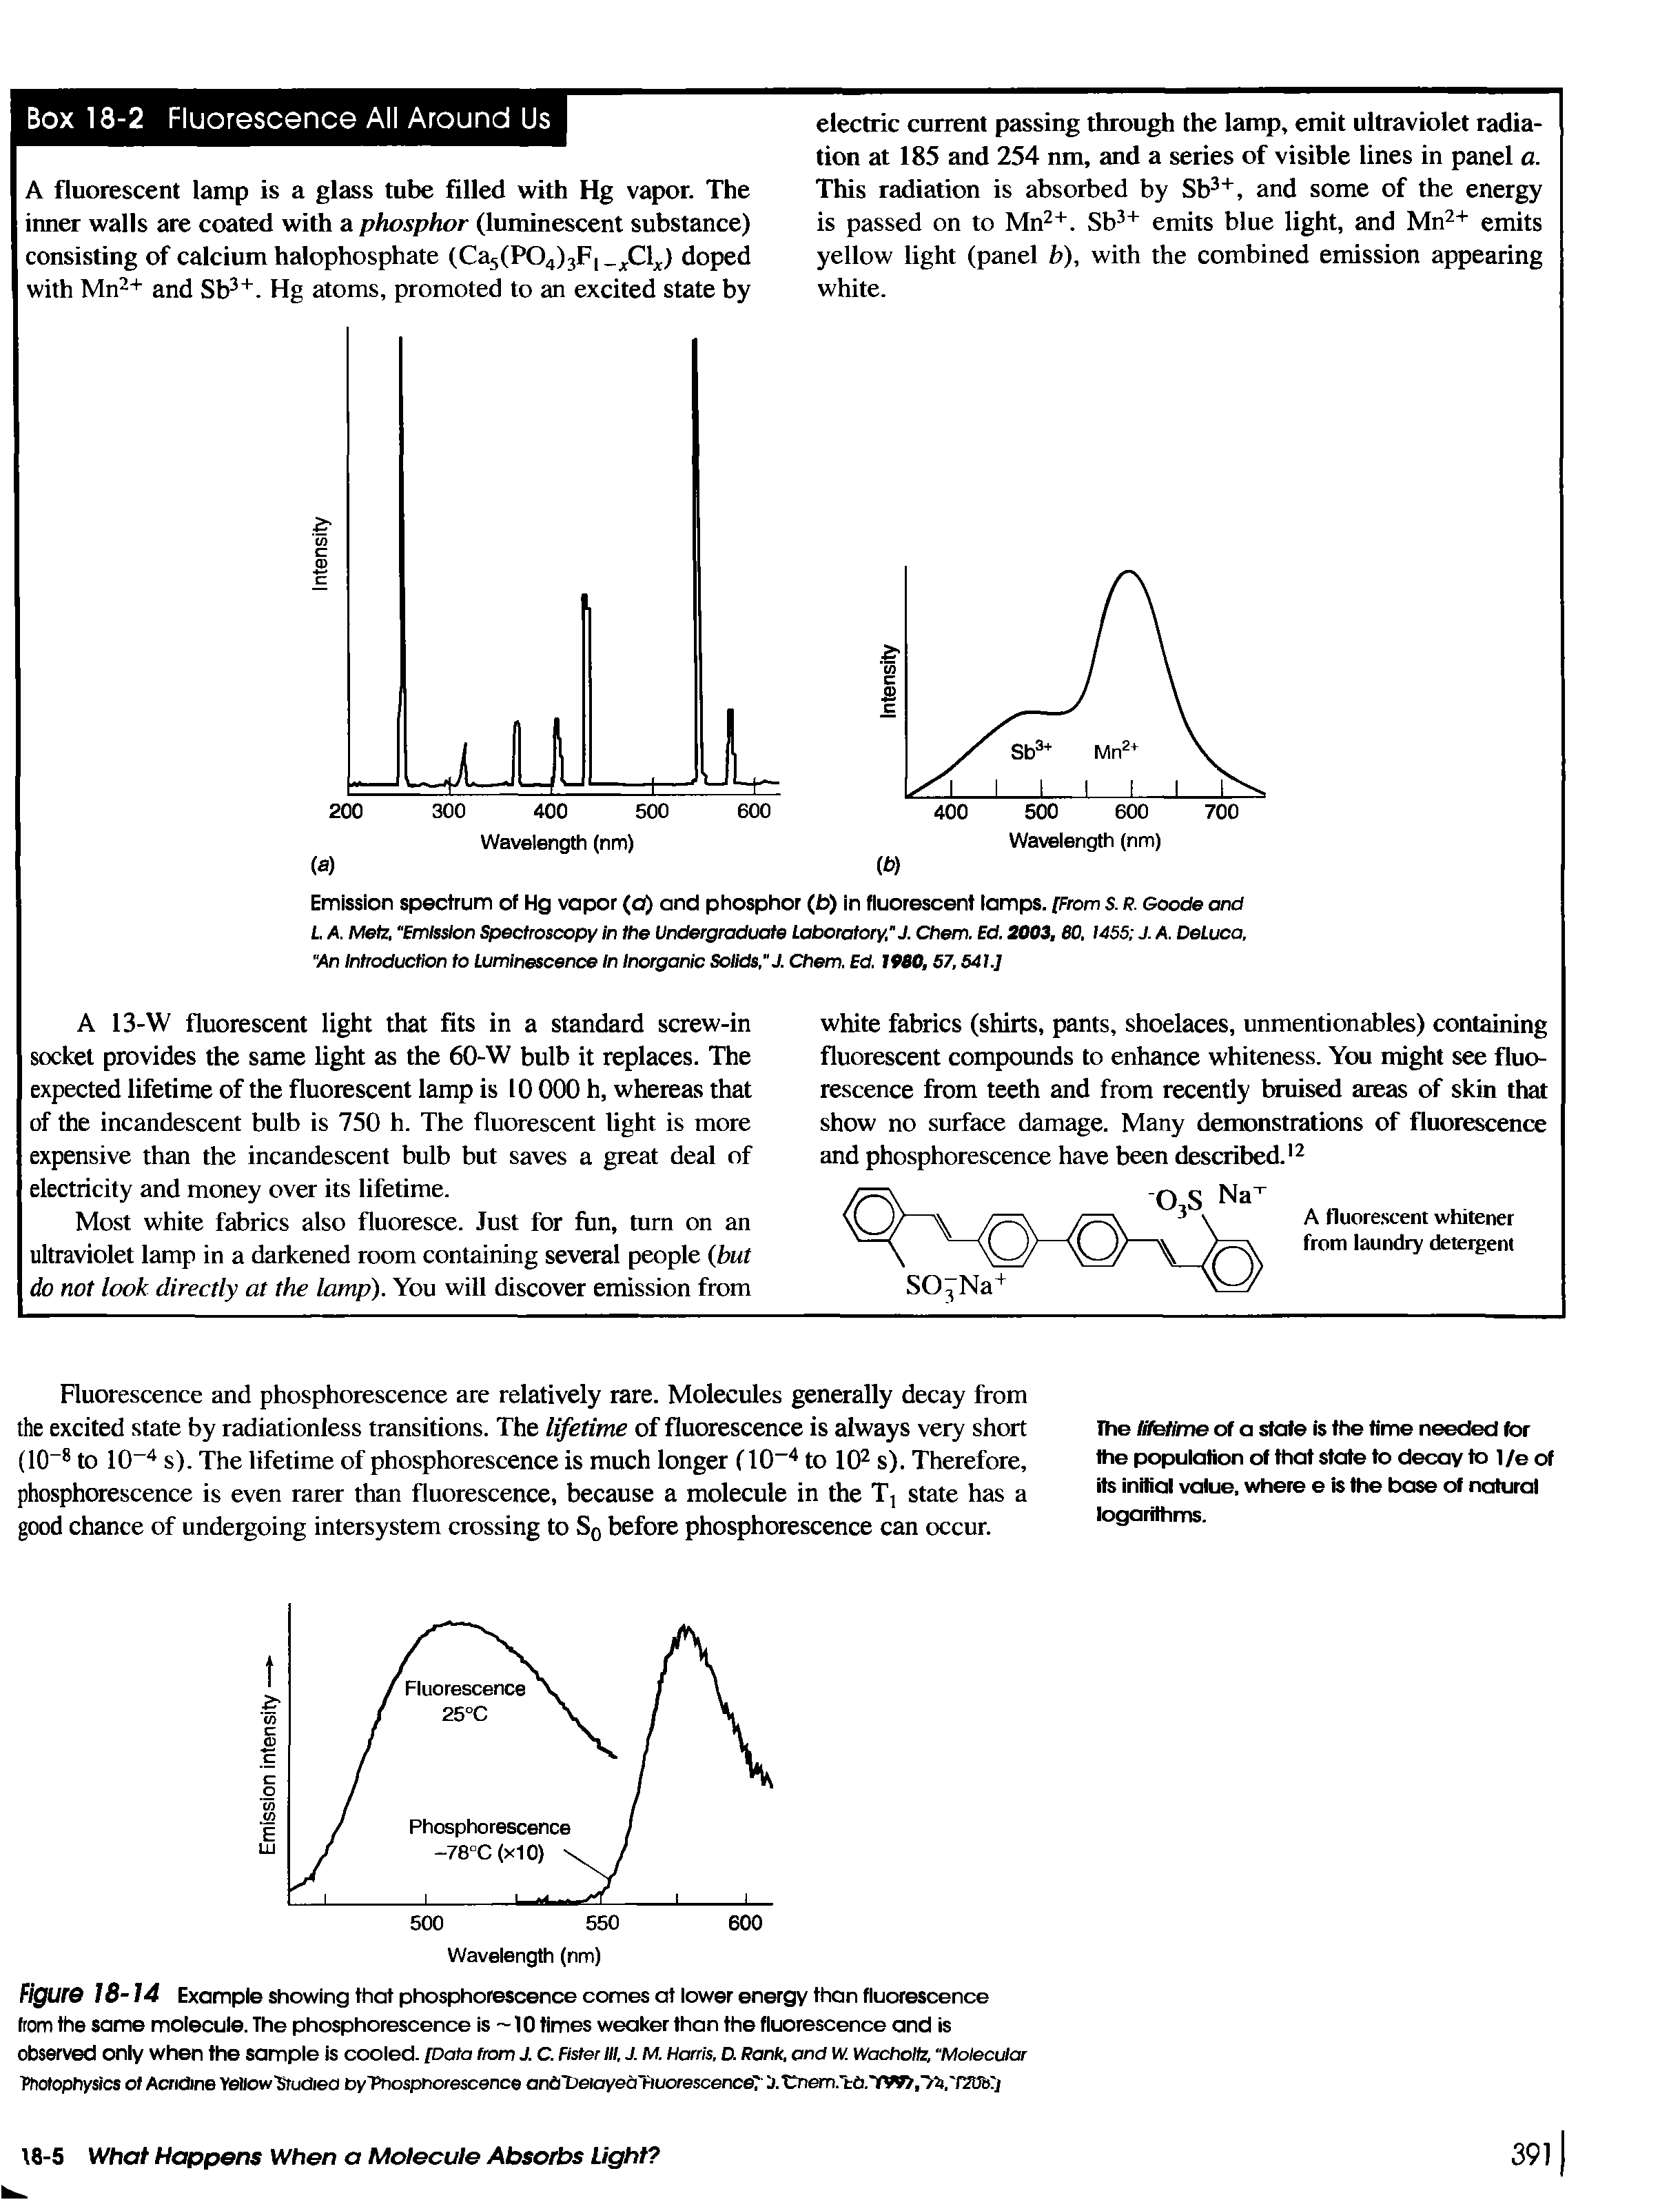 Figure 18-14 Example showing that phosphorescence comes at lower energy than fluorescence from the same molecule. The phosphorescence is —10 times weaker than the fluorescence and is observed only when the sample is cooled. [Data from J. C. Fister III, J. M. Harris, n Rank, and W. Wacholtz, "Molecular Wiotophysics of Acridine Yellow Studied OyTtiospnorescence anCLieiayedTiuorescence S. Cnem.-td.YW>I >Vf2tJKl...